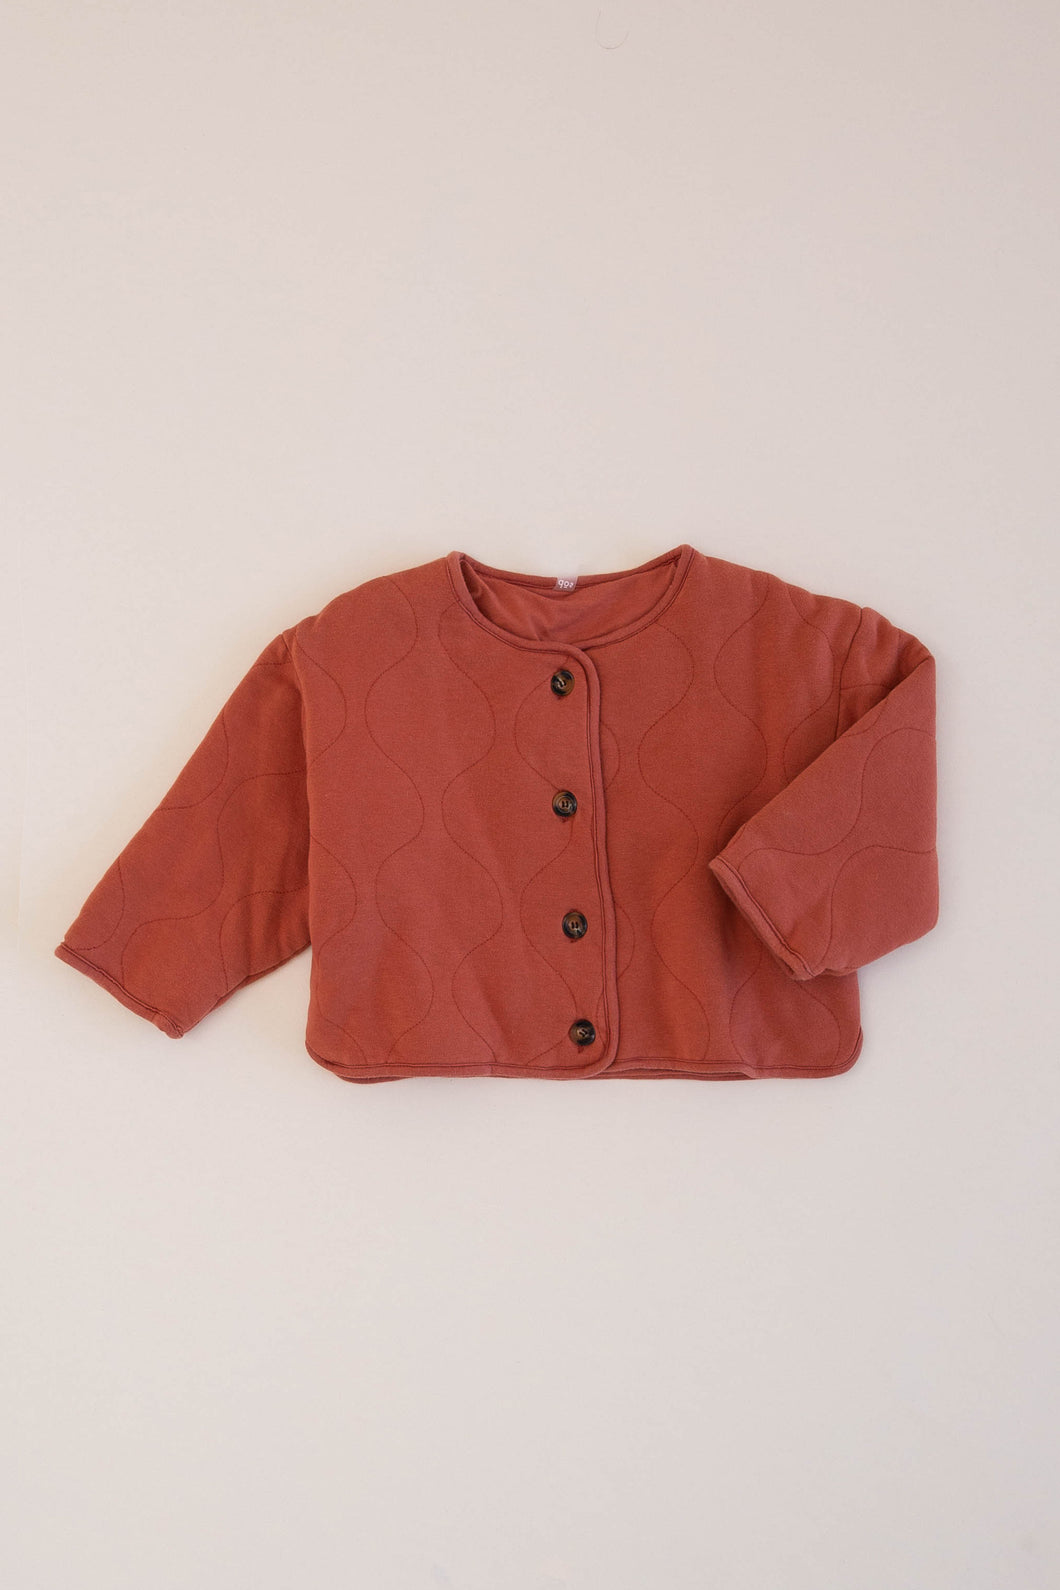 QUILTED LINER JACKET, RAW SIENNA